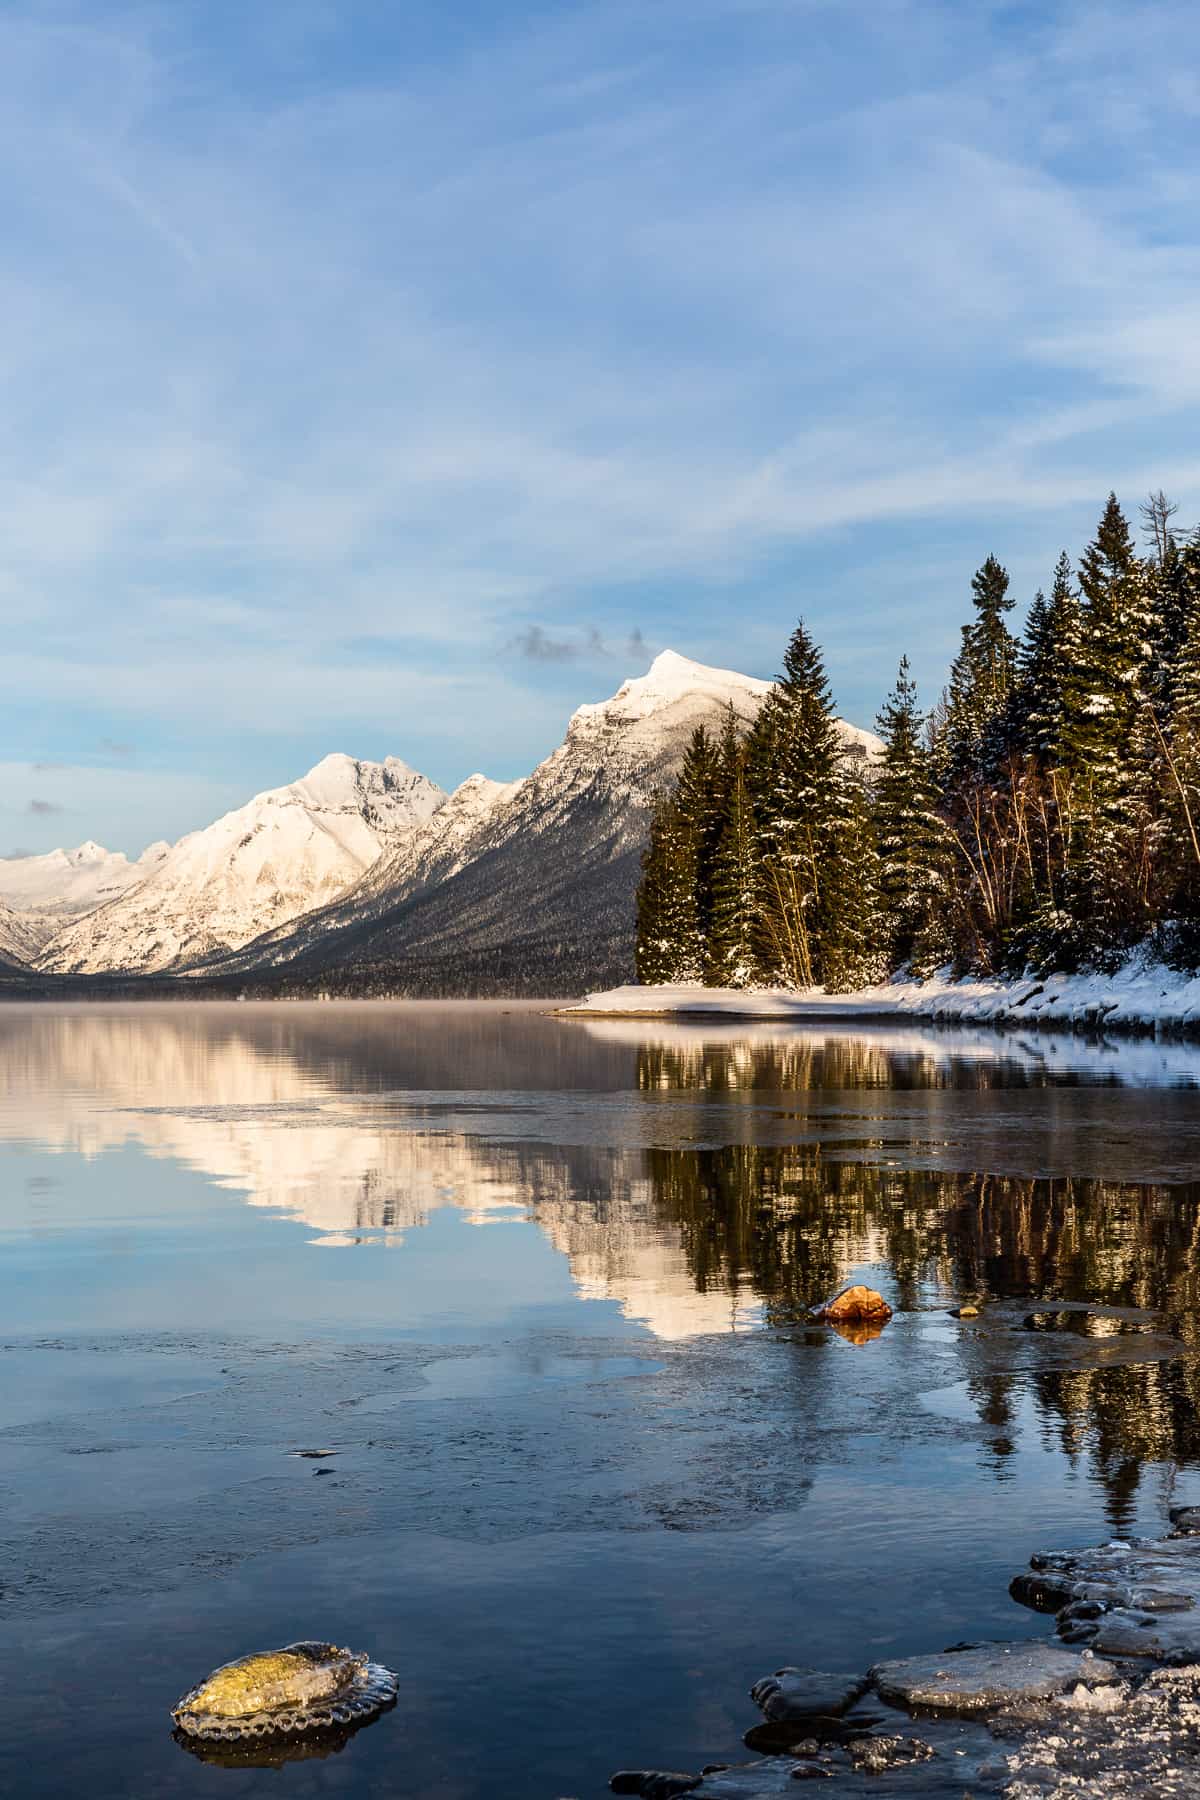 Snowy mountains reflecting into a lake with trees and snow on the shoreline.